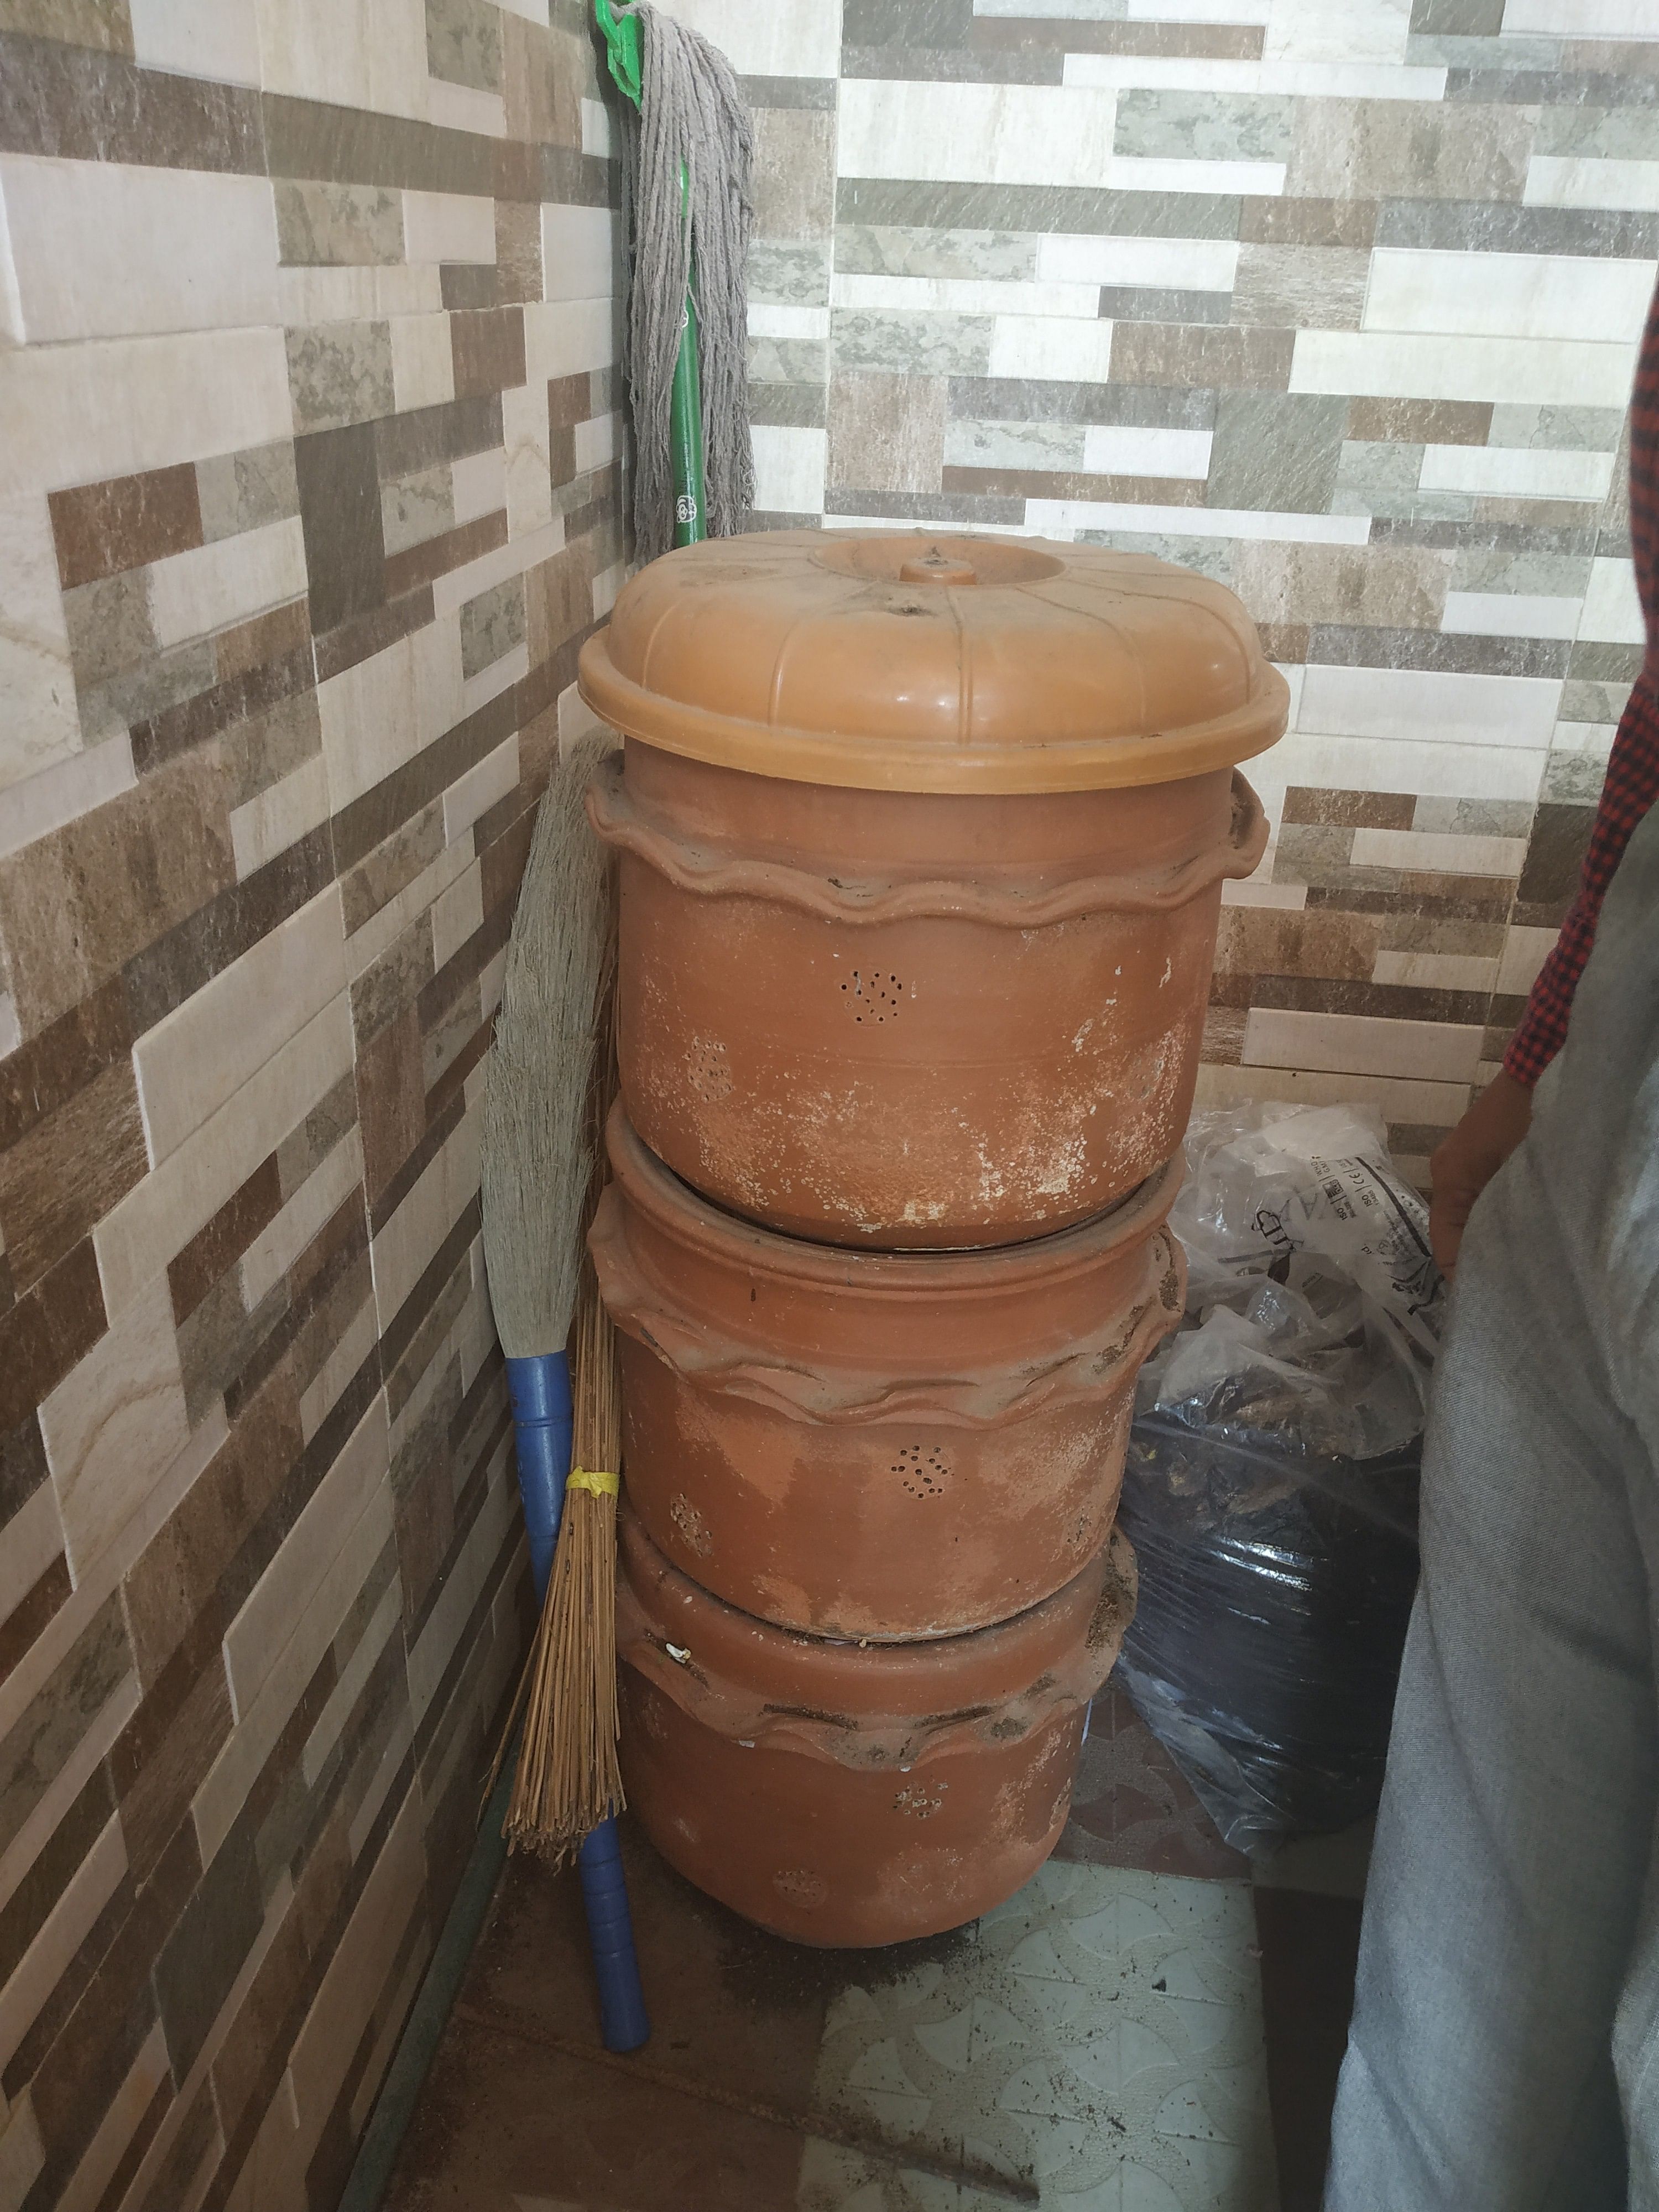 A clay composting bin at Dr Venugopal’s house.